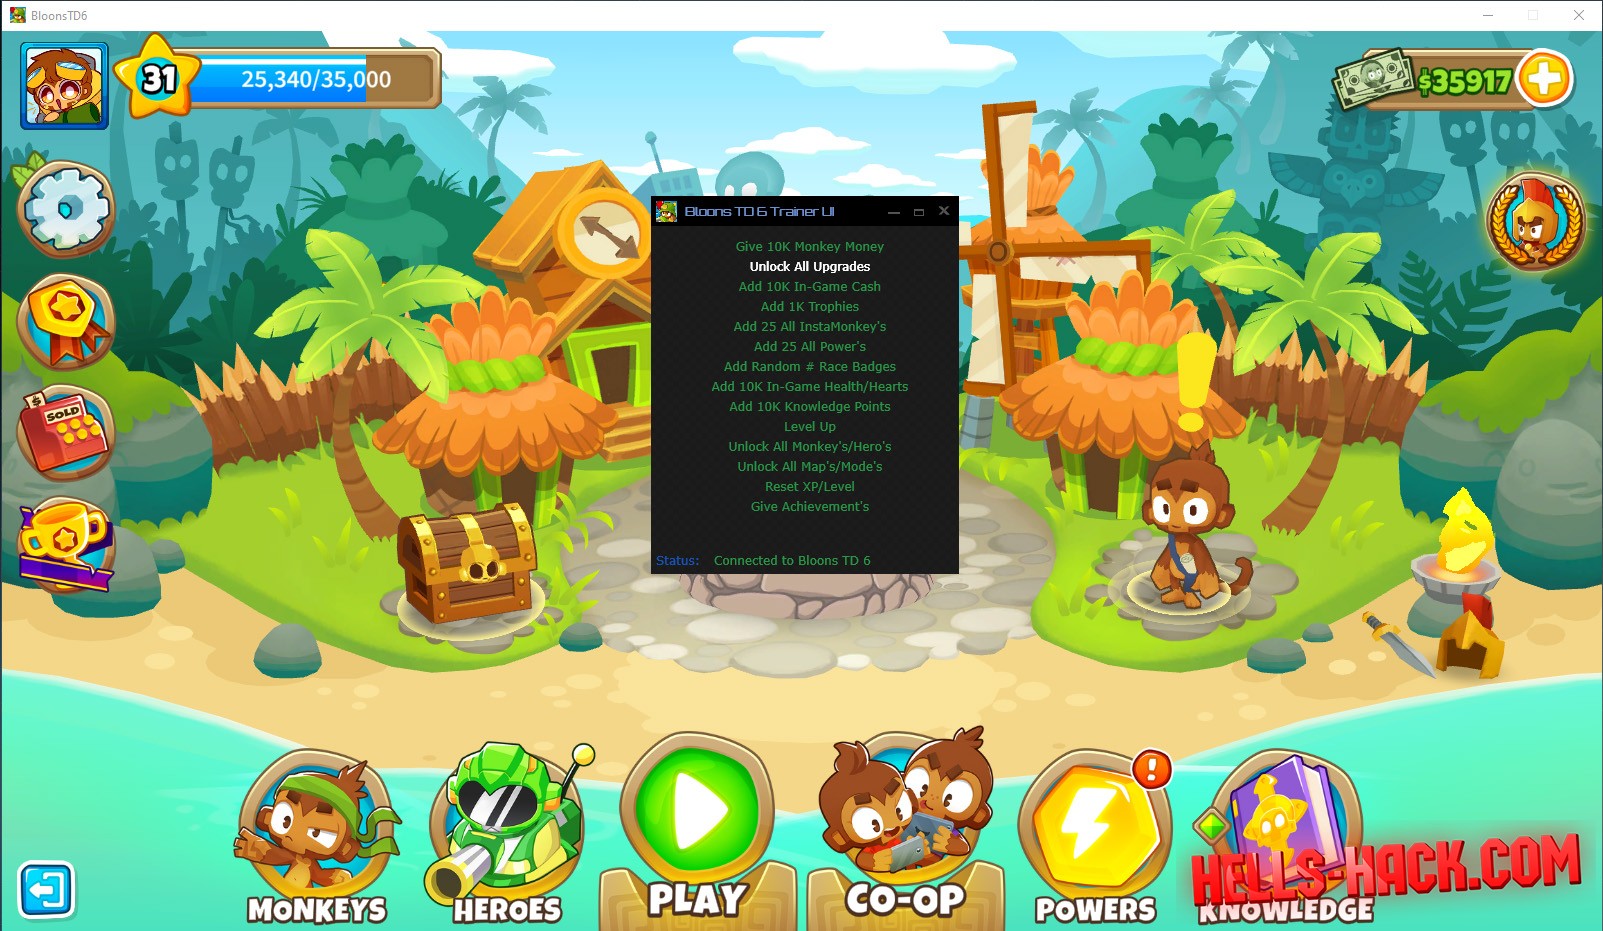 bloons td 6 cheat engine 2022